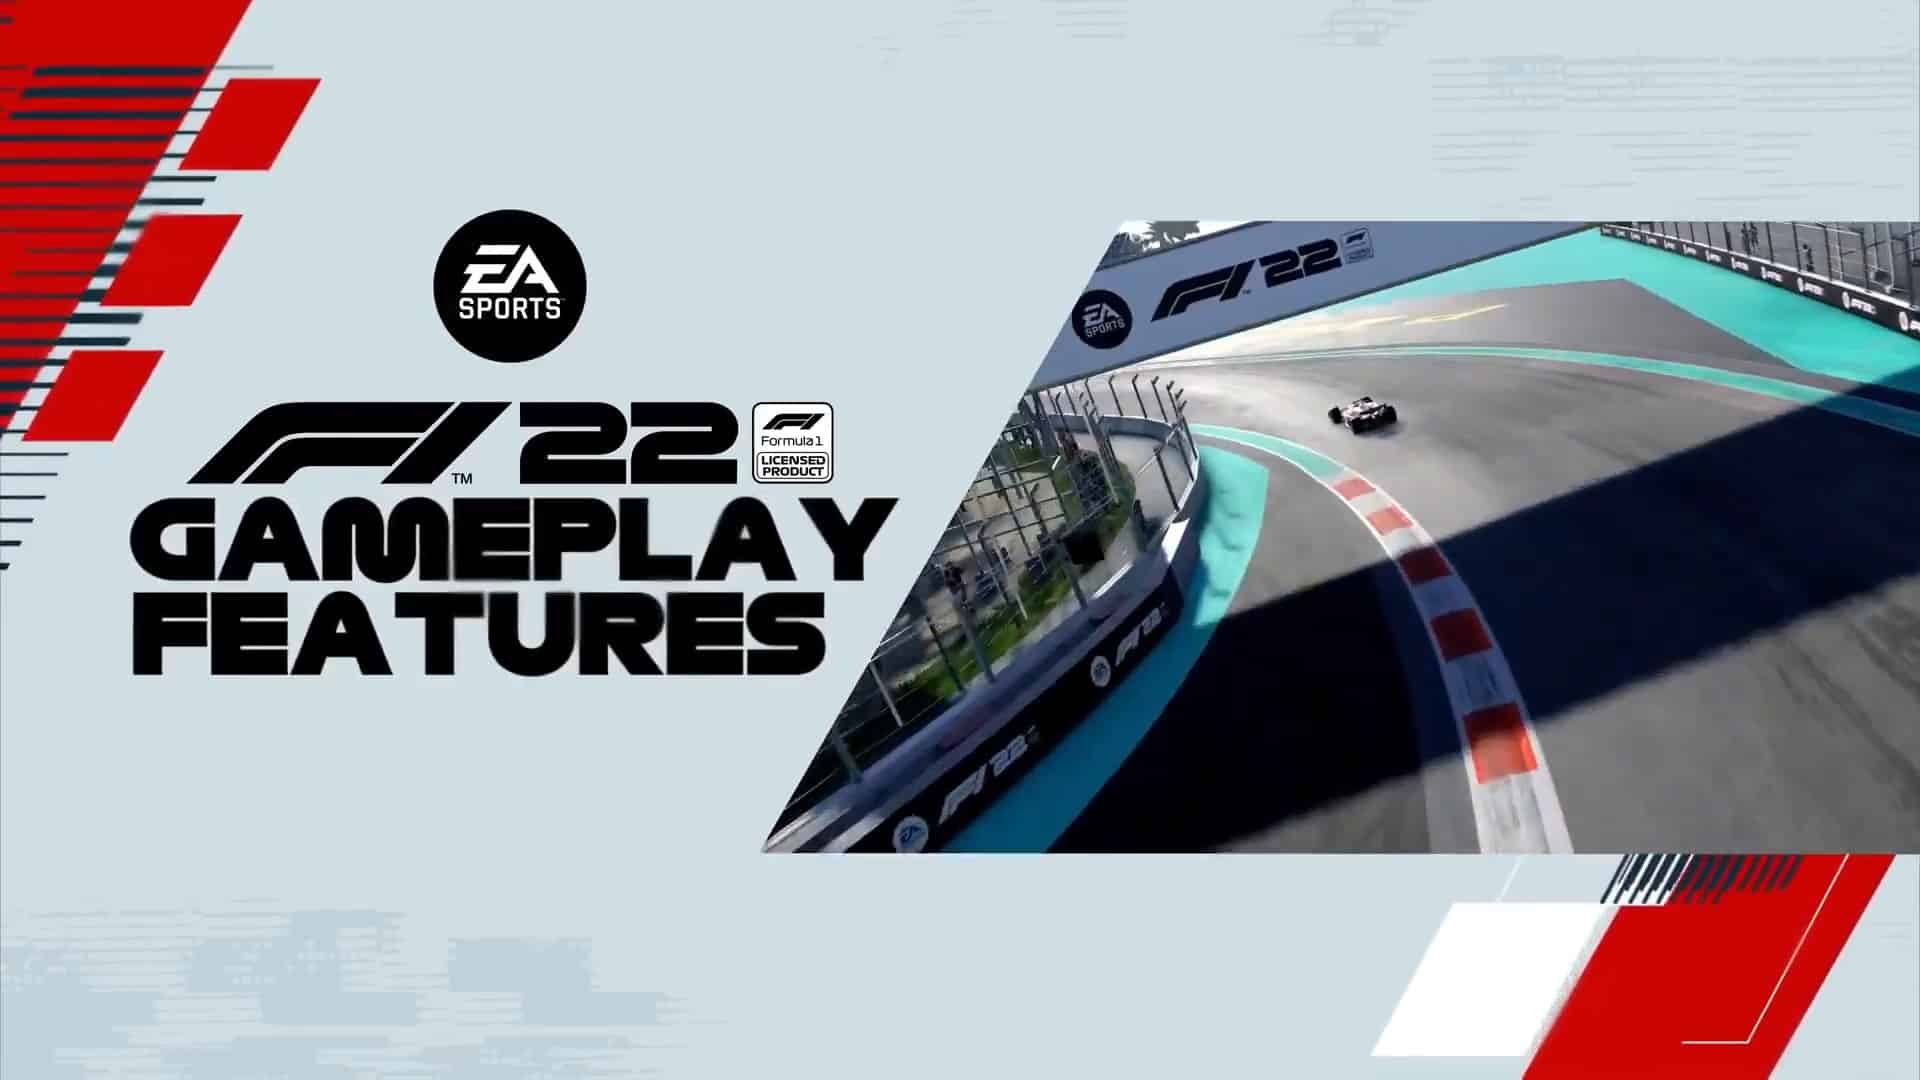 Latest F1 22 trailer showcases upcoming Gameplay Features